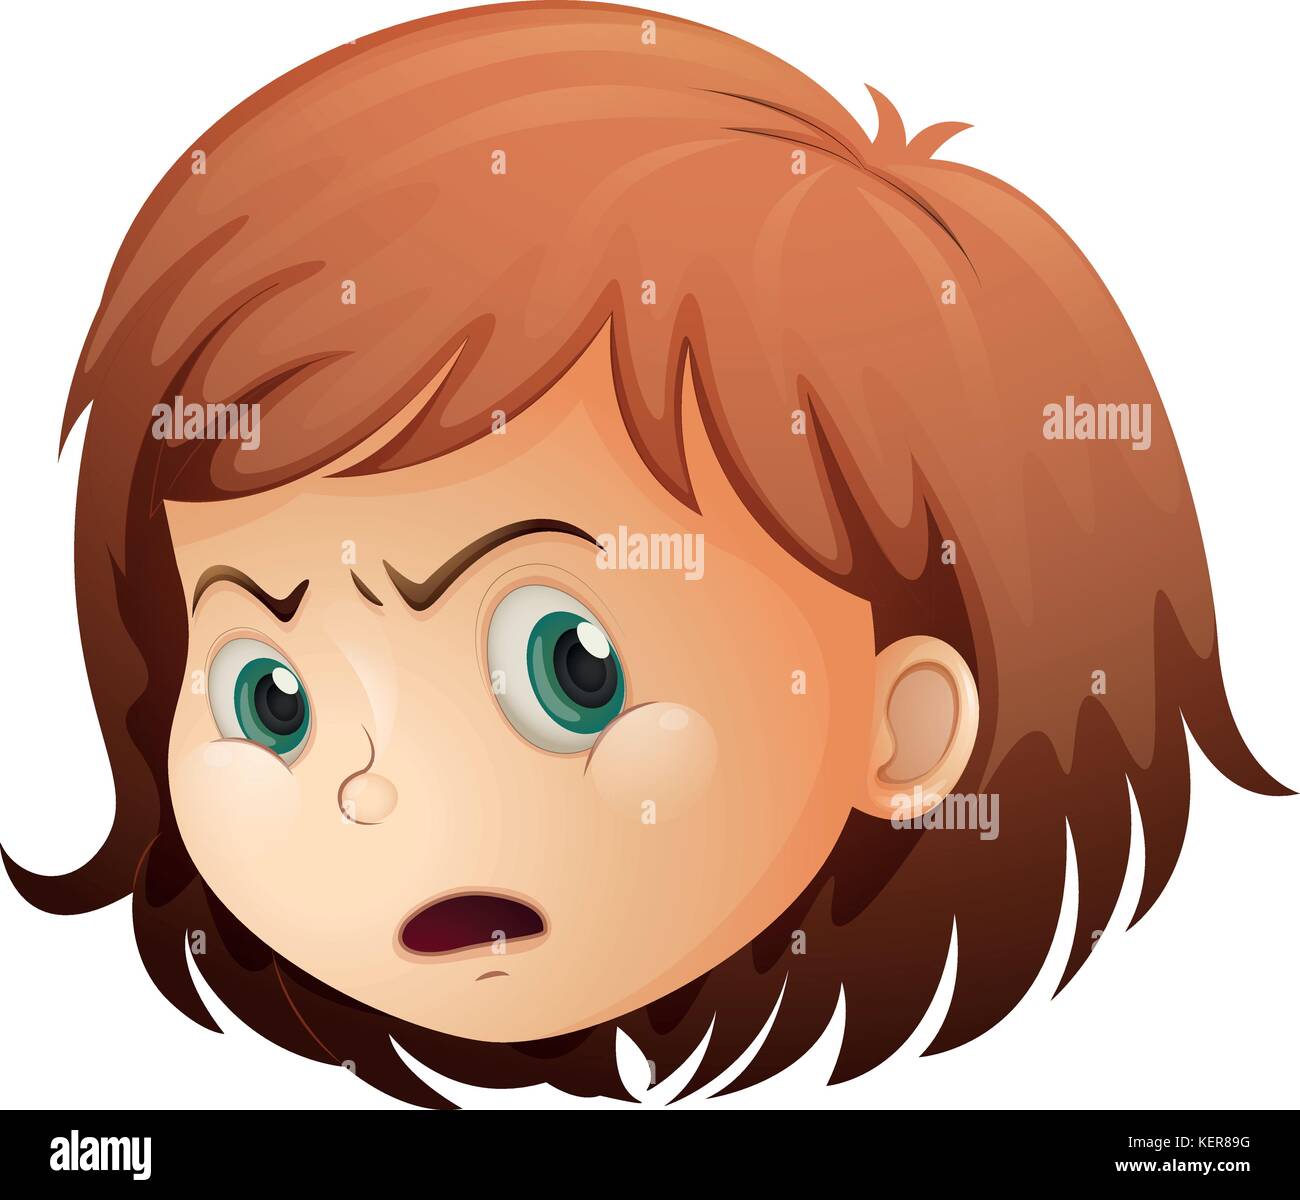 Illustration of a head of an angry child on a white background Stock Vector